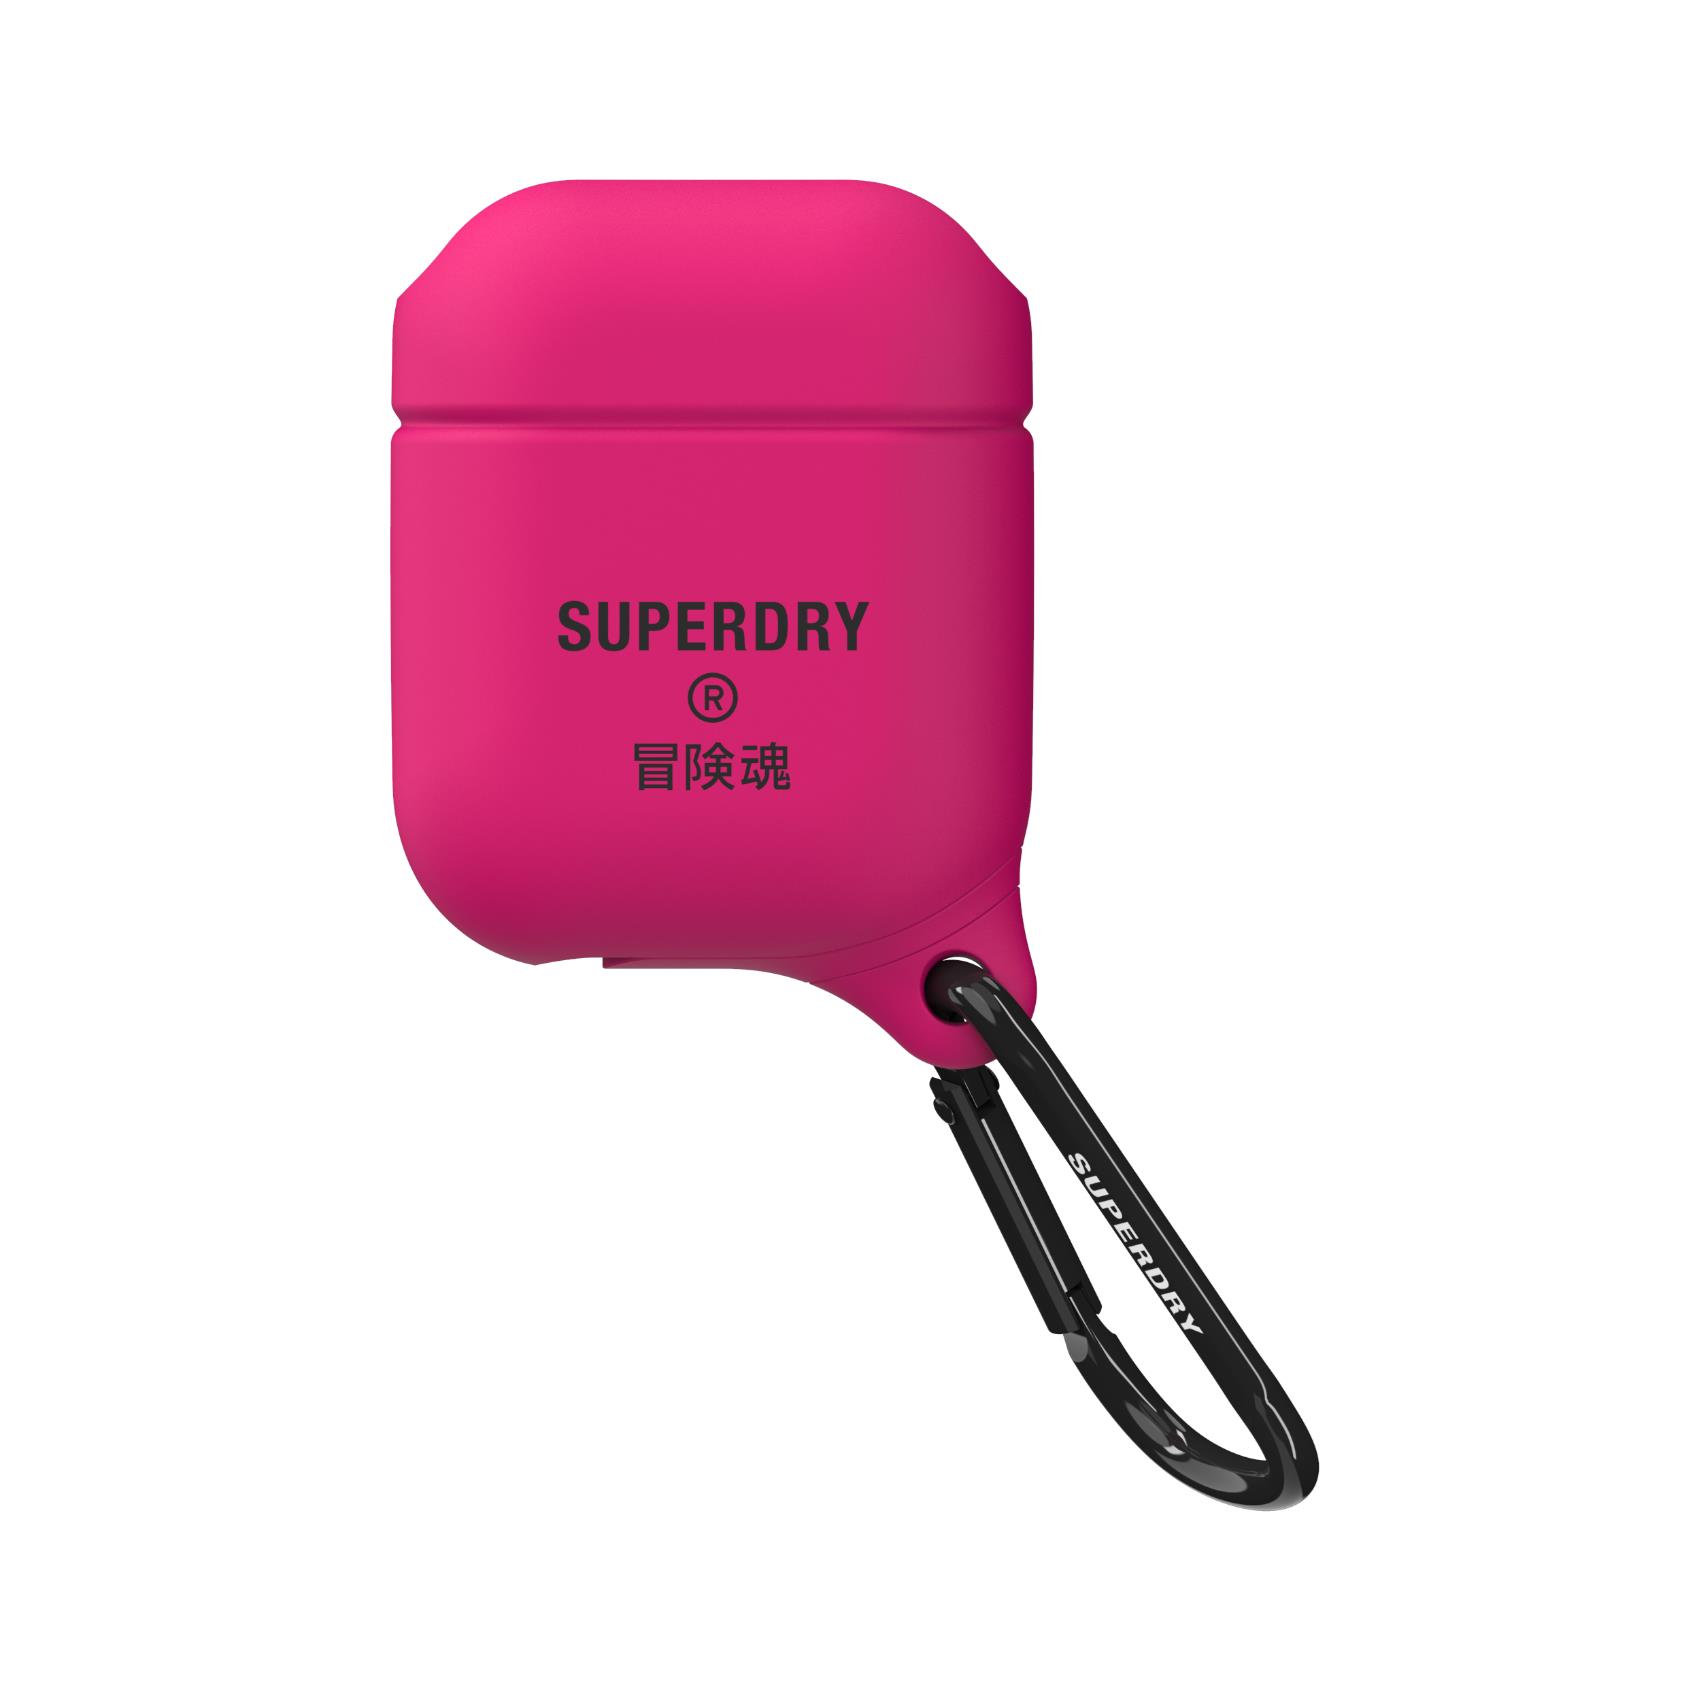 SUPERDRY AIRPOD COVER PINK